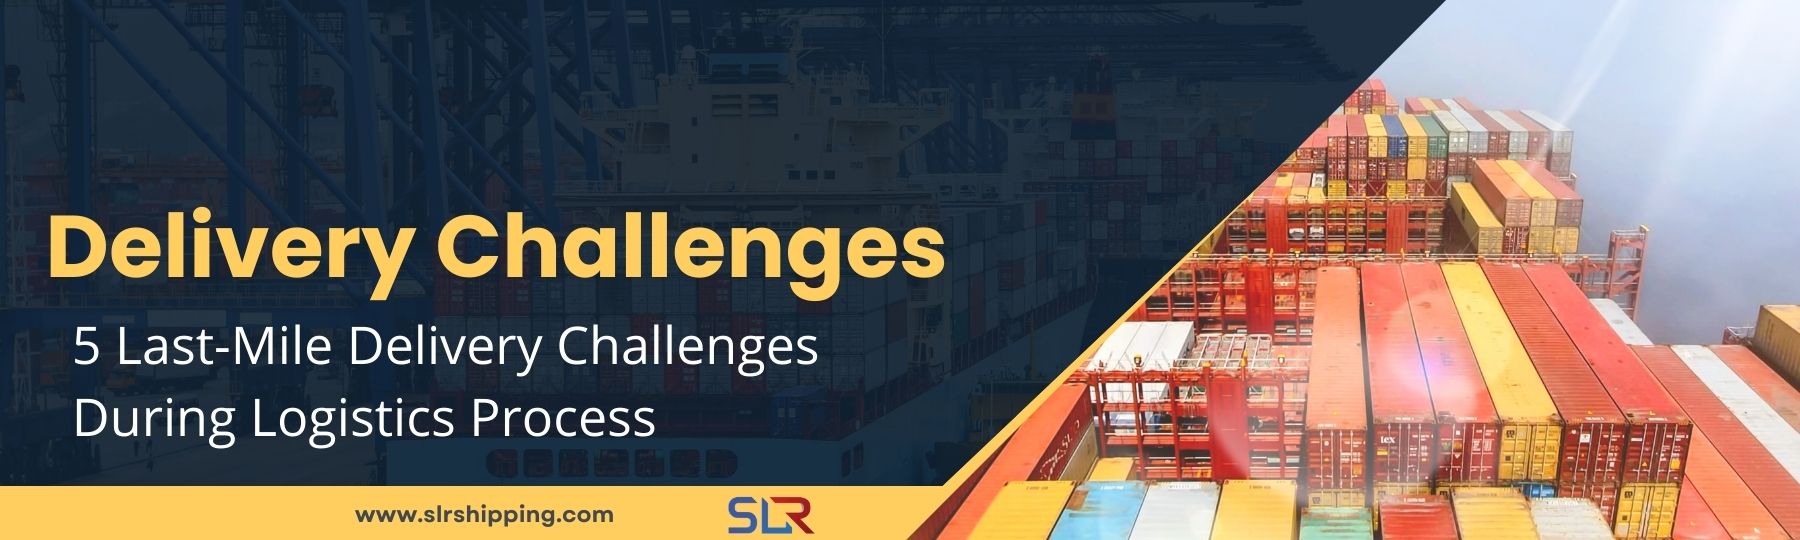 Delivery Challenges